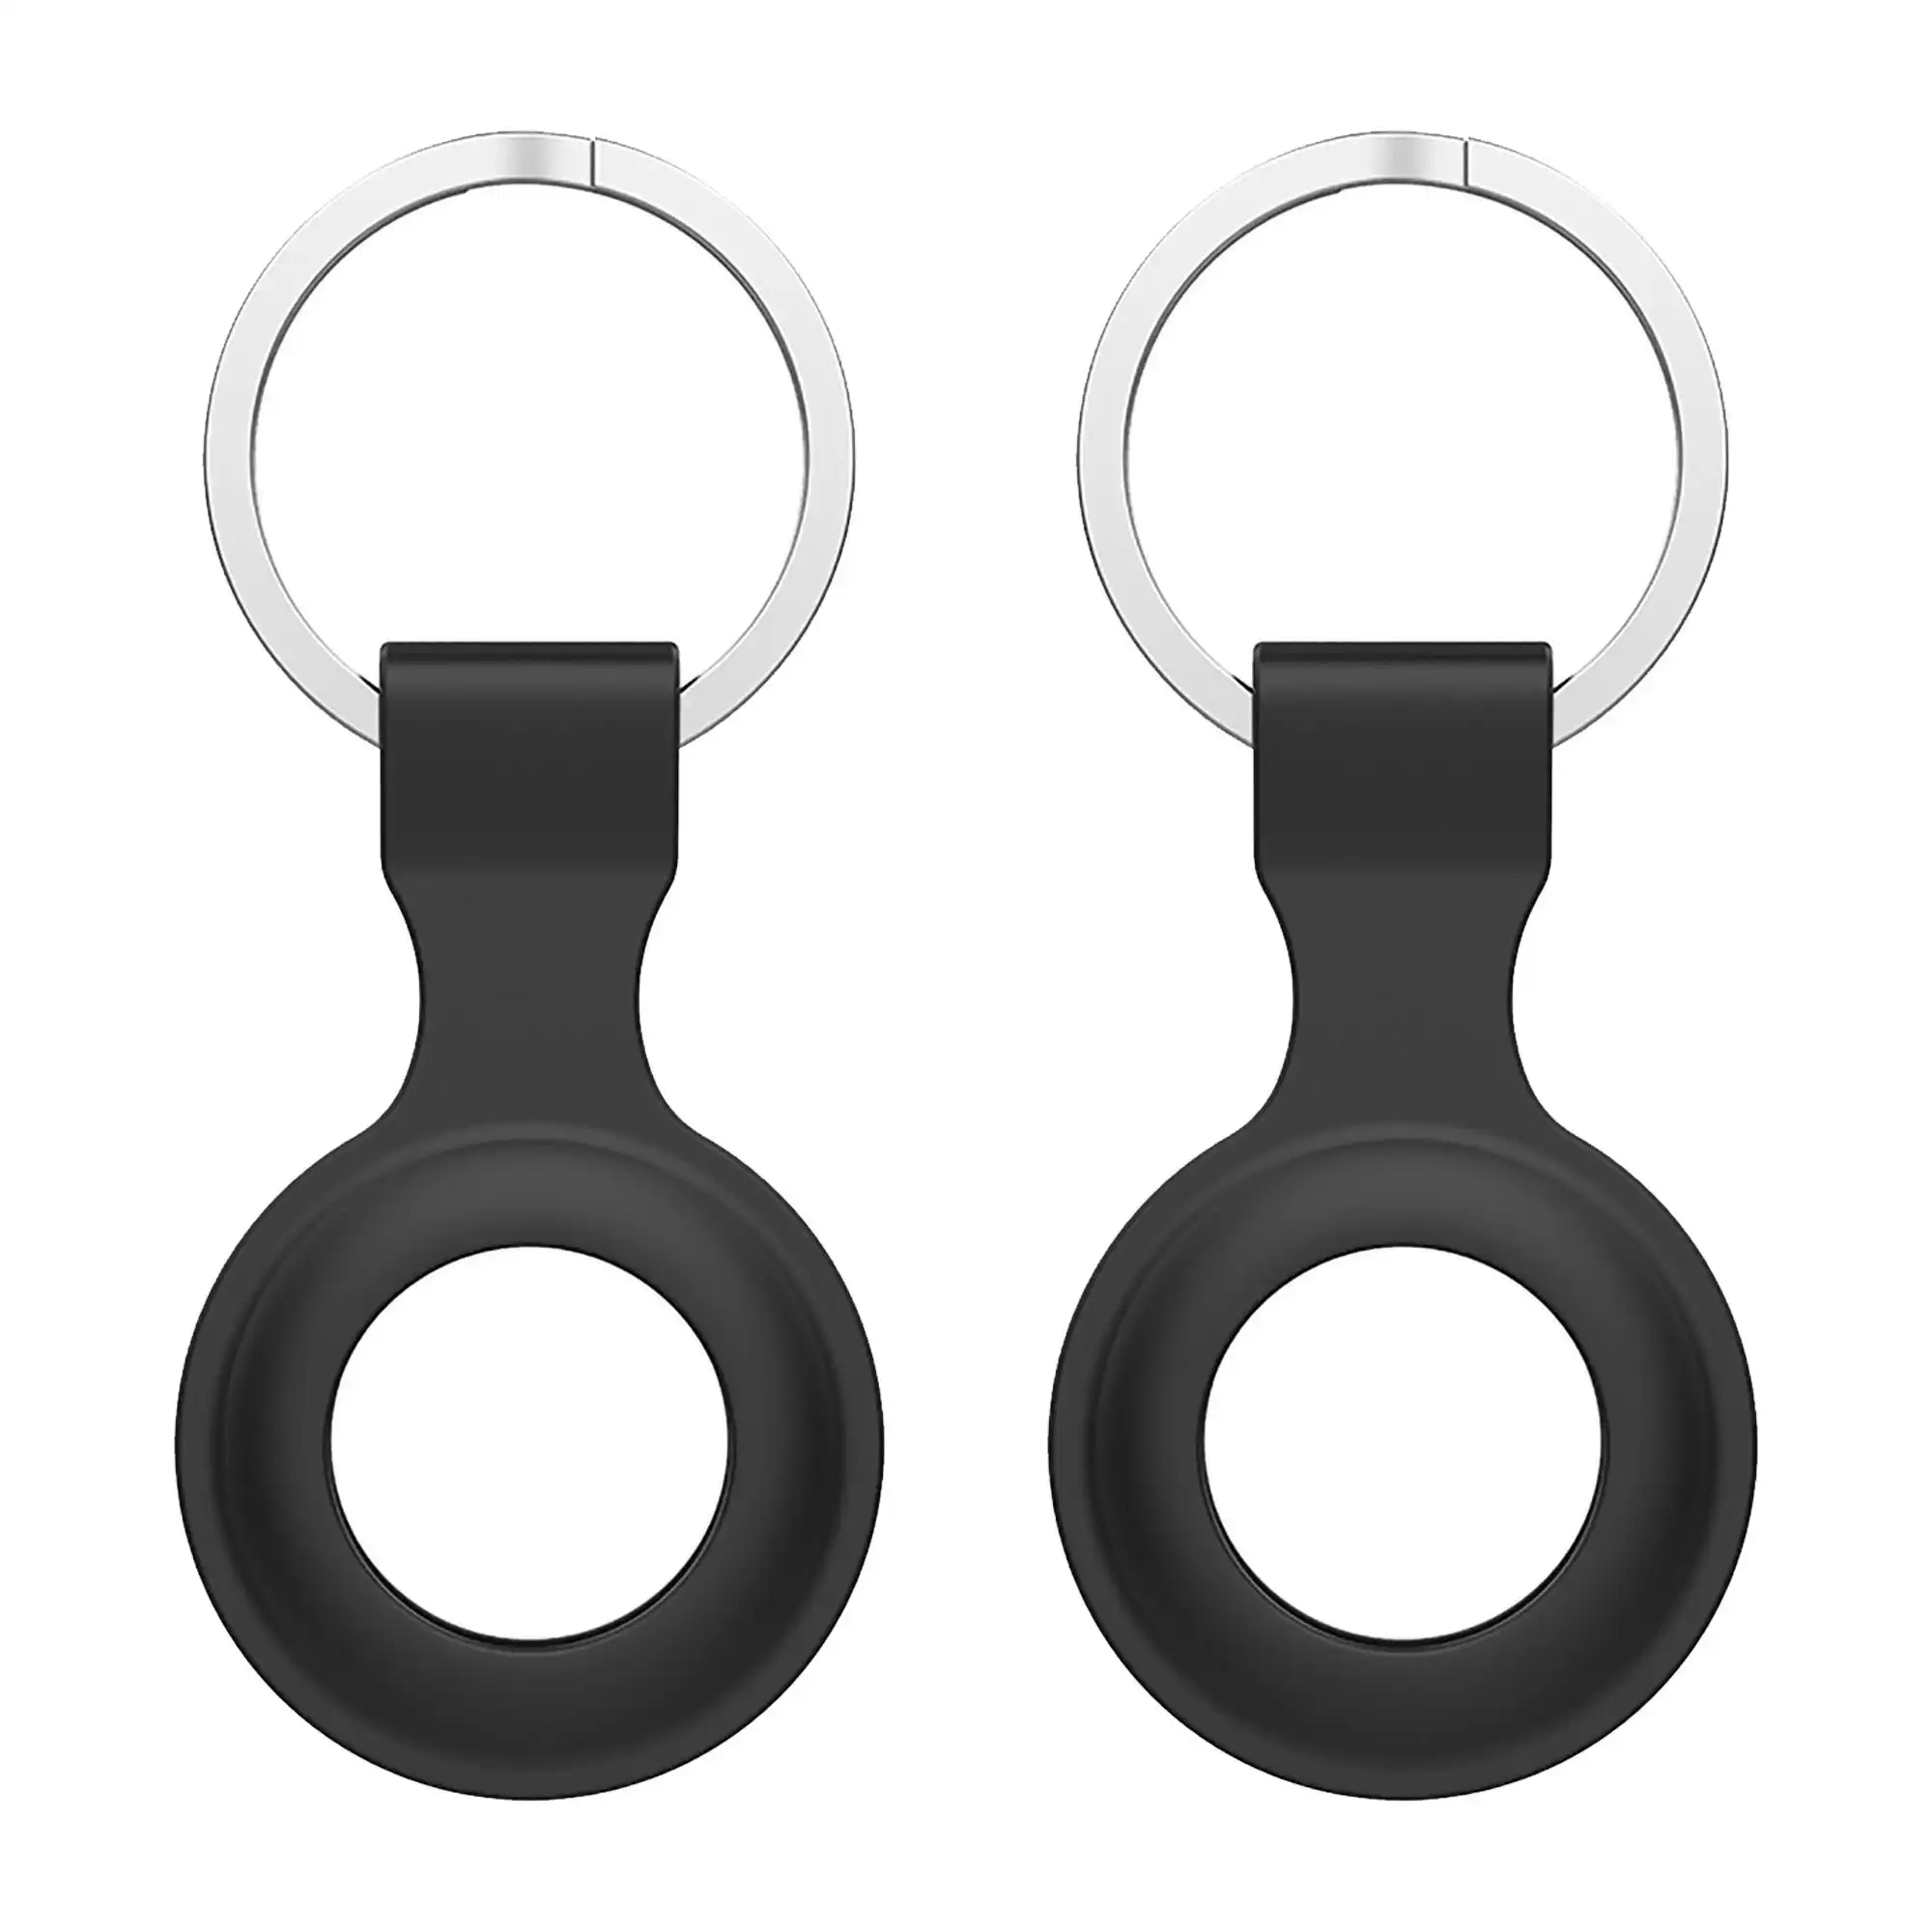 [2 Pack] MEZON Black Silicone Protective Case Holder for Apple AirTag Tracker with Keychain Ring (Silicone Hole, 2x Black)